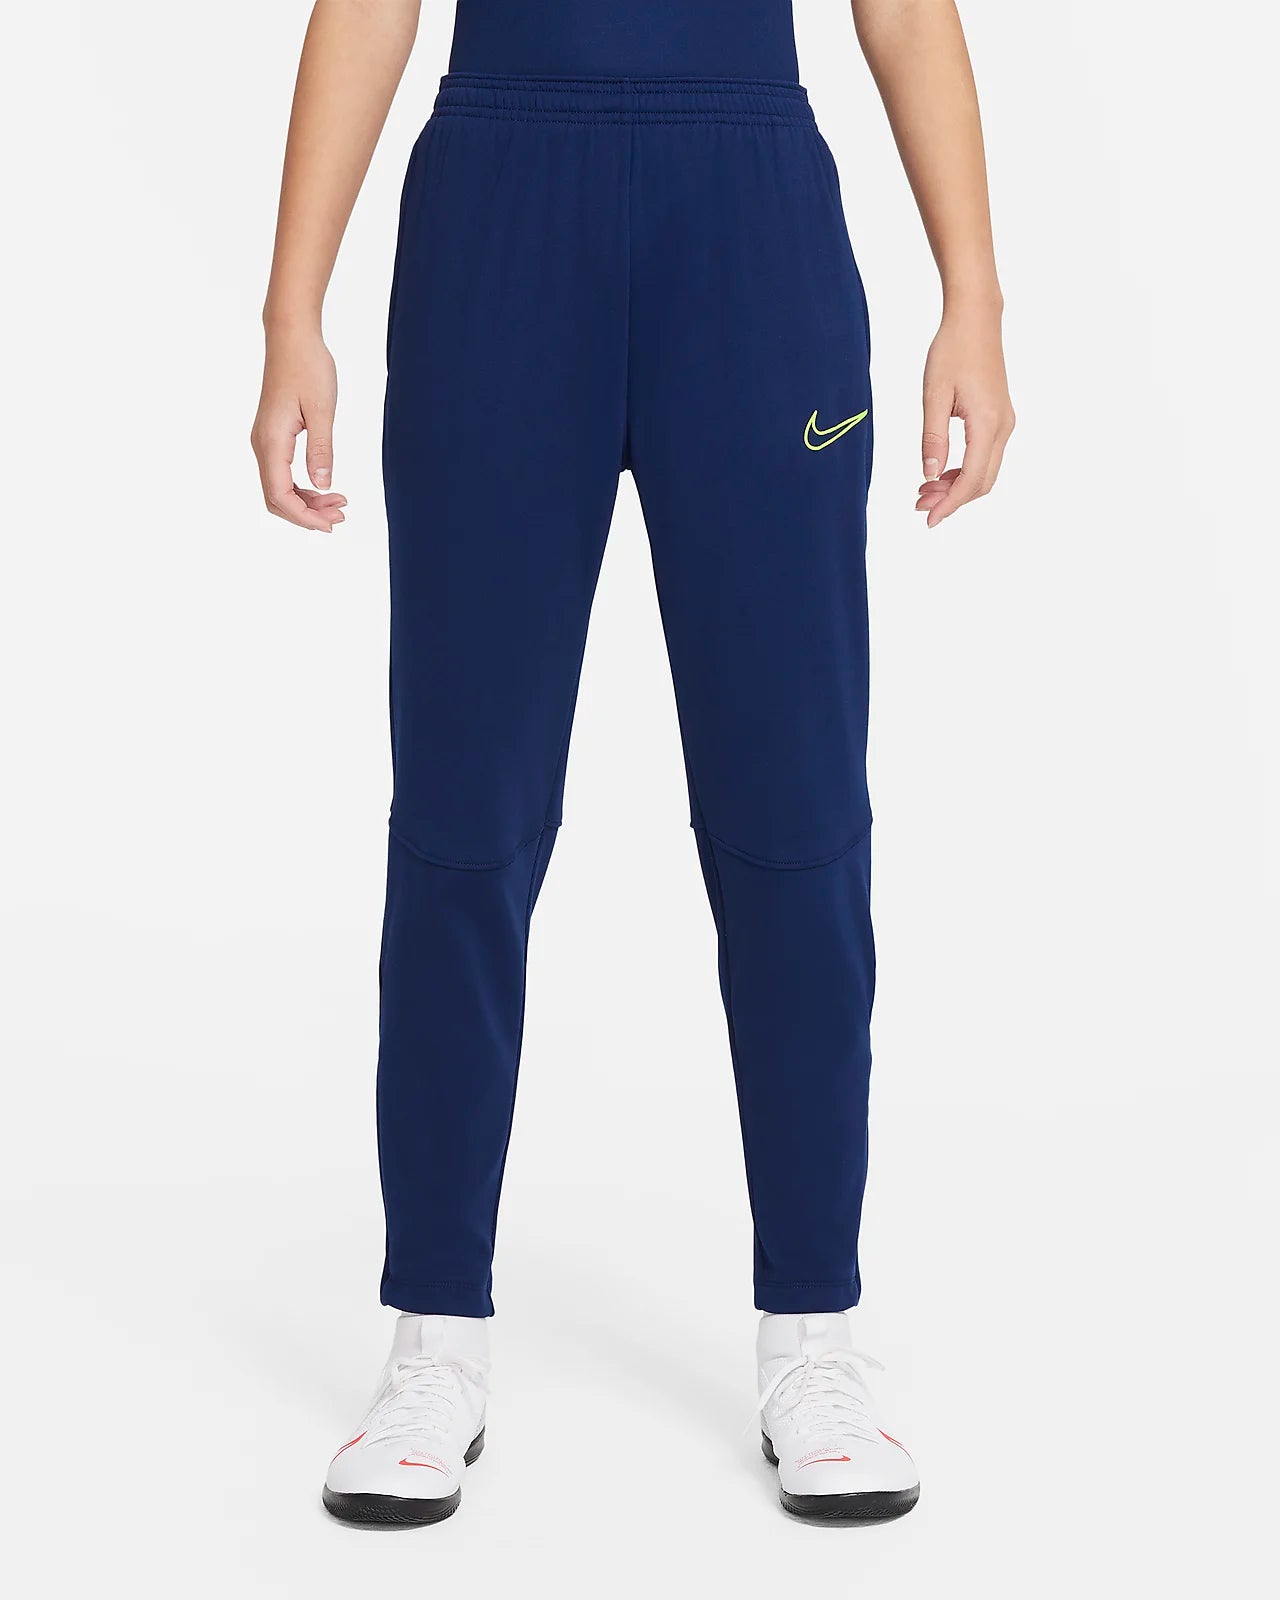 NIKE THERMA DRILL TROUSERS - BLUE VOID